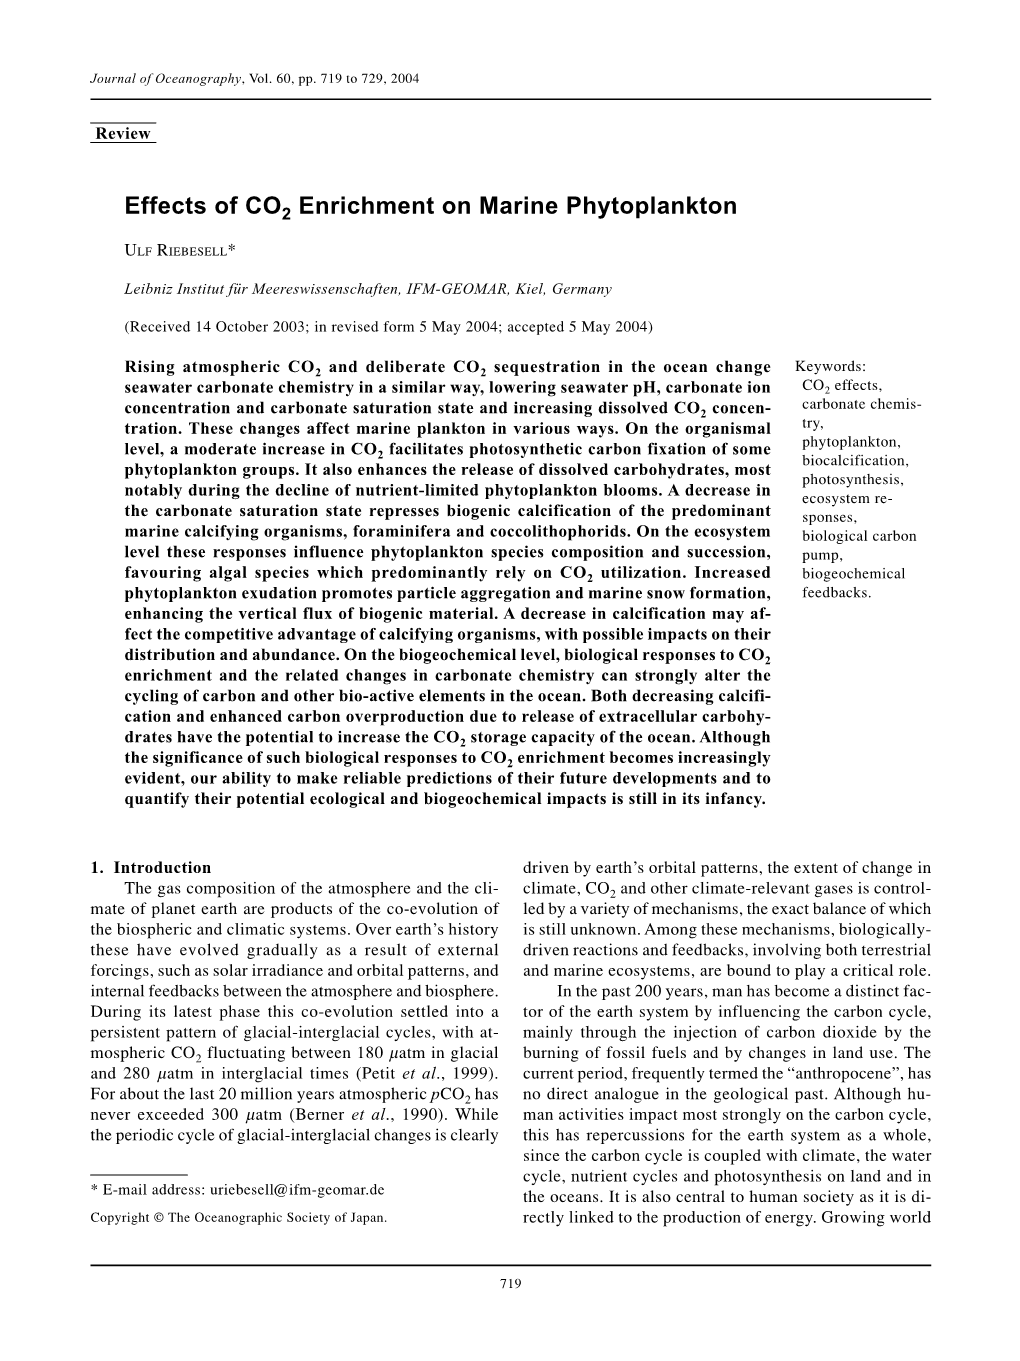 Effects of CO2 Enrichment on Marine Phytoplankton